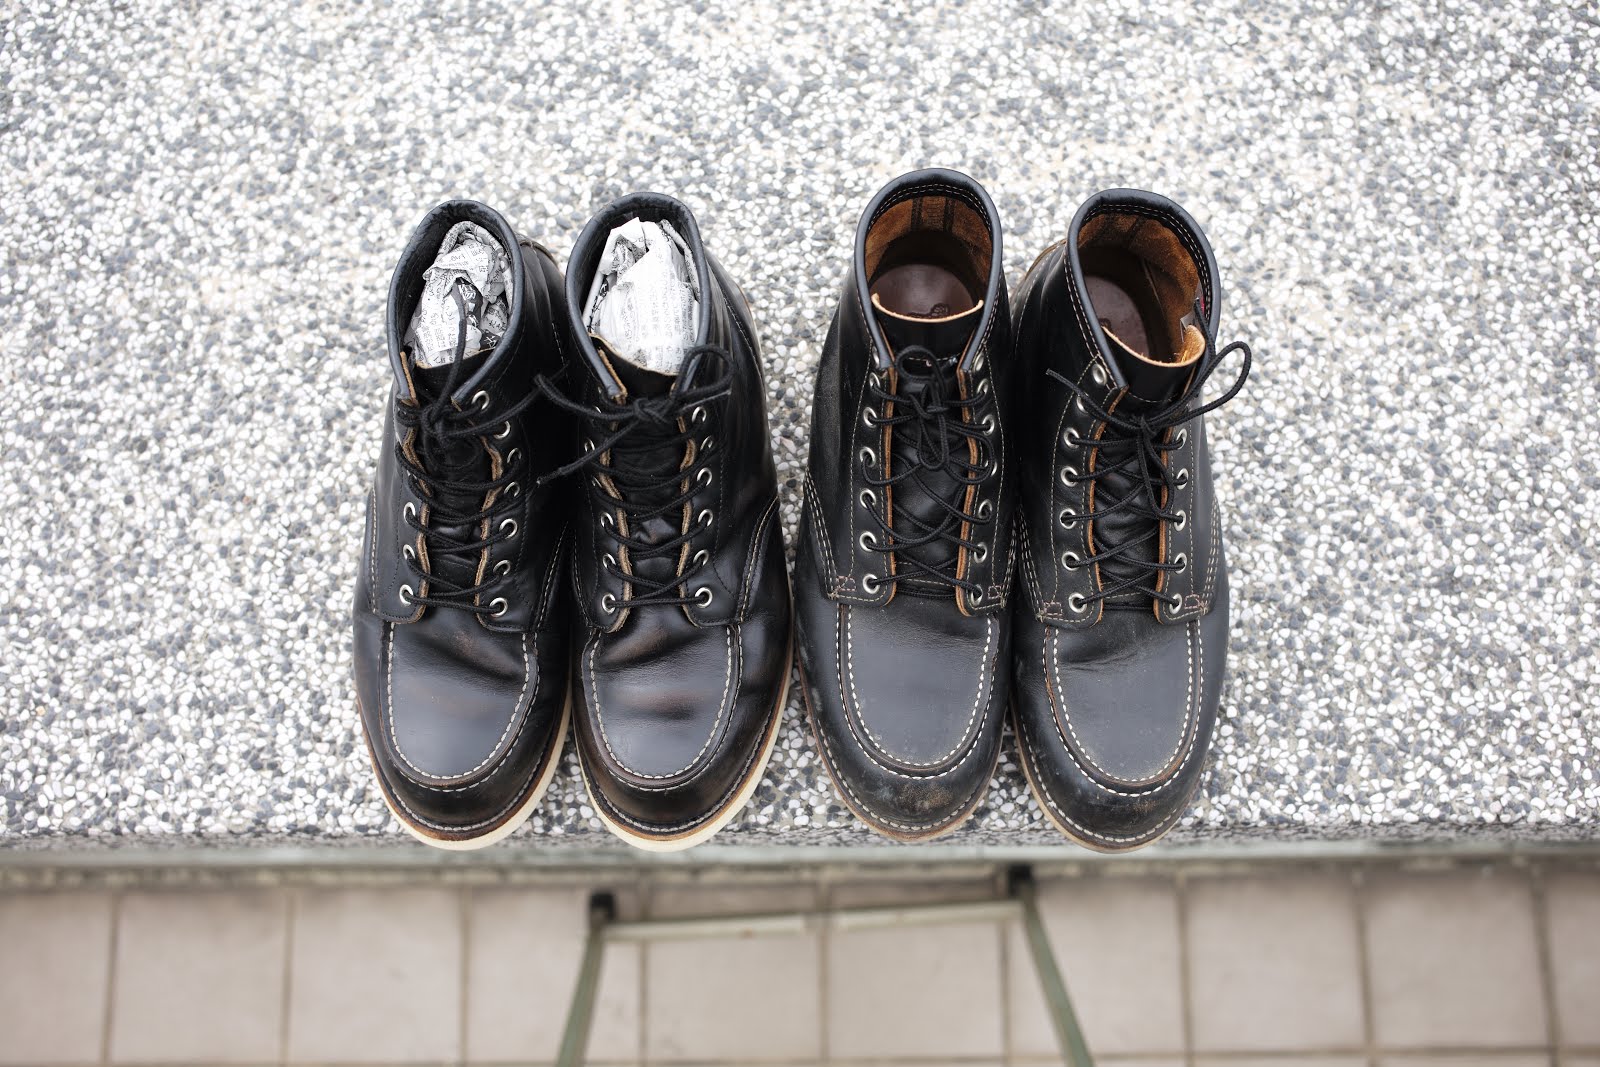 Outdoor style and workwear: [紅翼茶芯] Red Wing 8179 and 9874